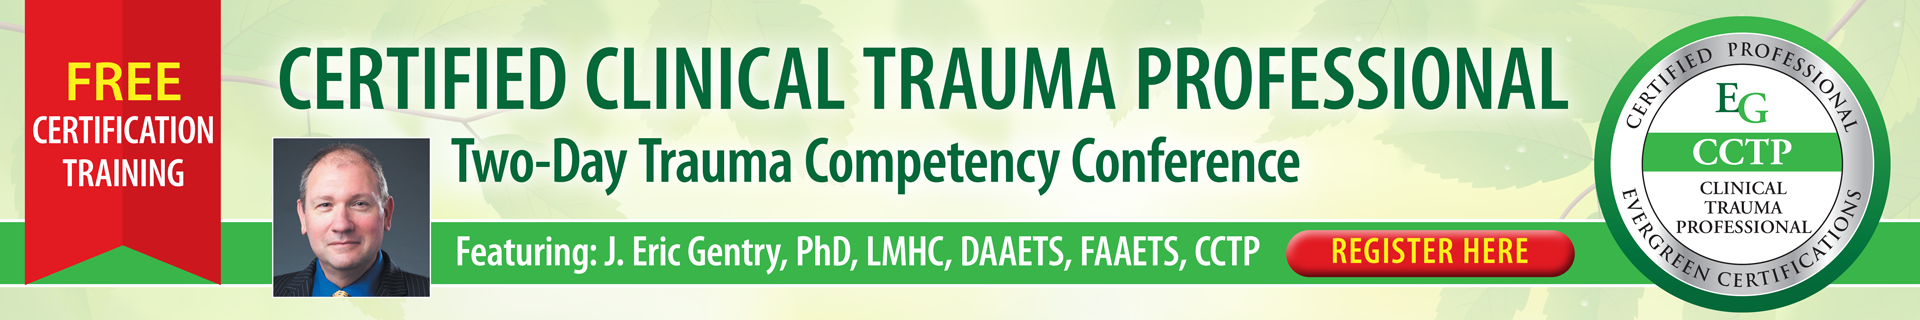 FREE Certified Clinical Trauma Professional (CCTP): Two-Day Trauma Competency Conference